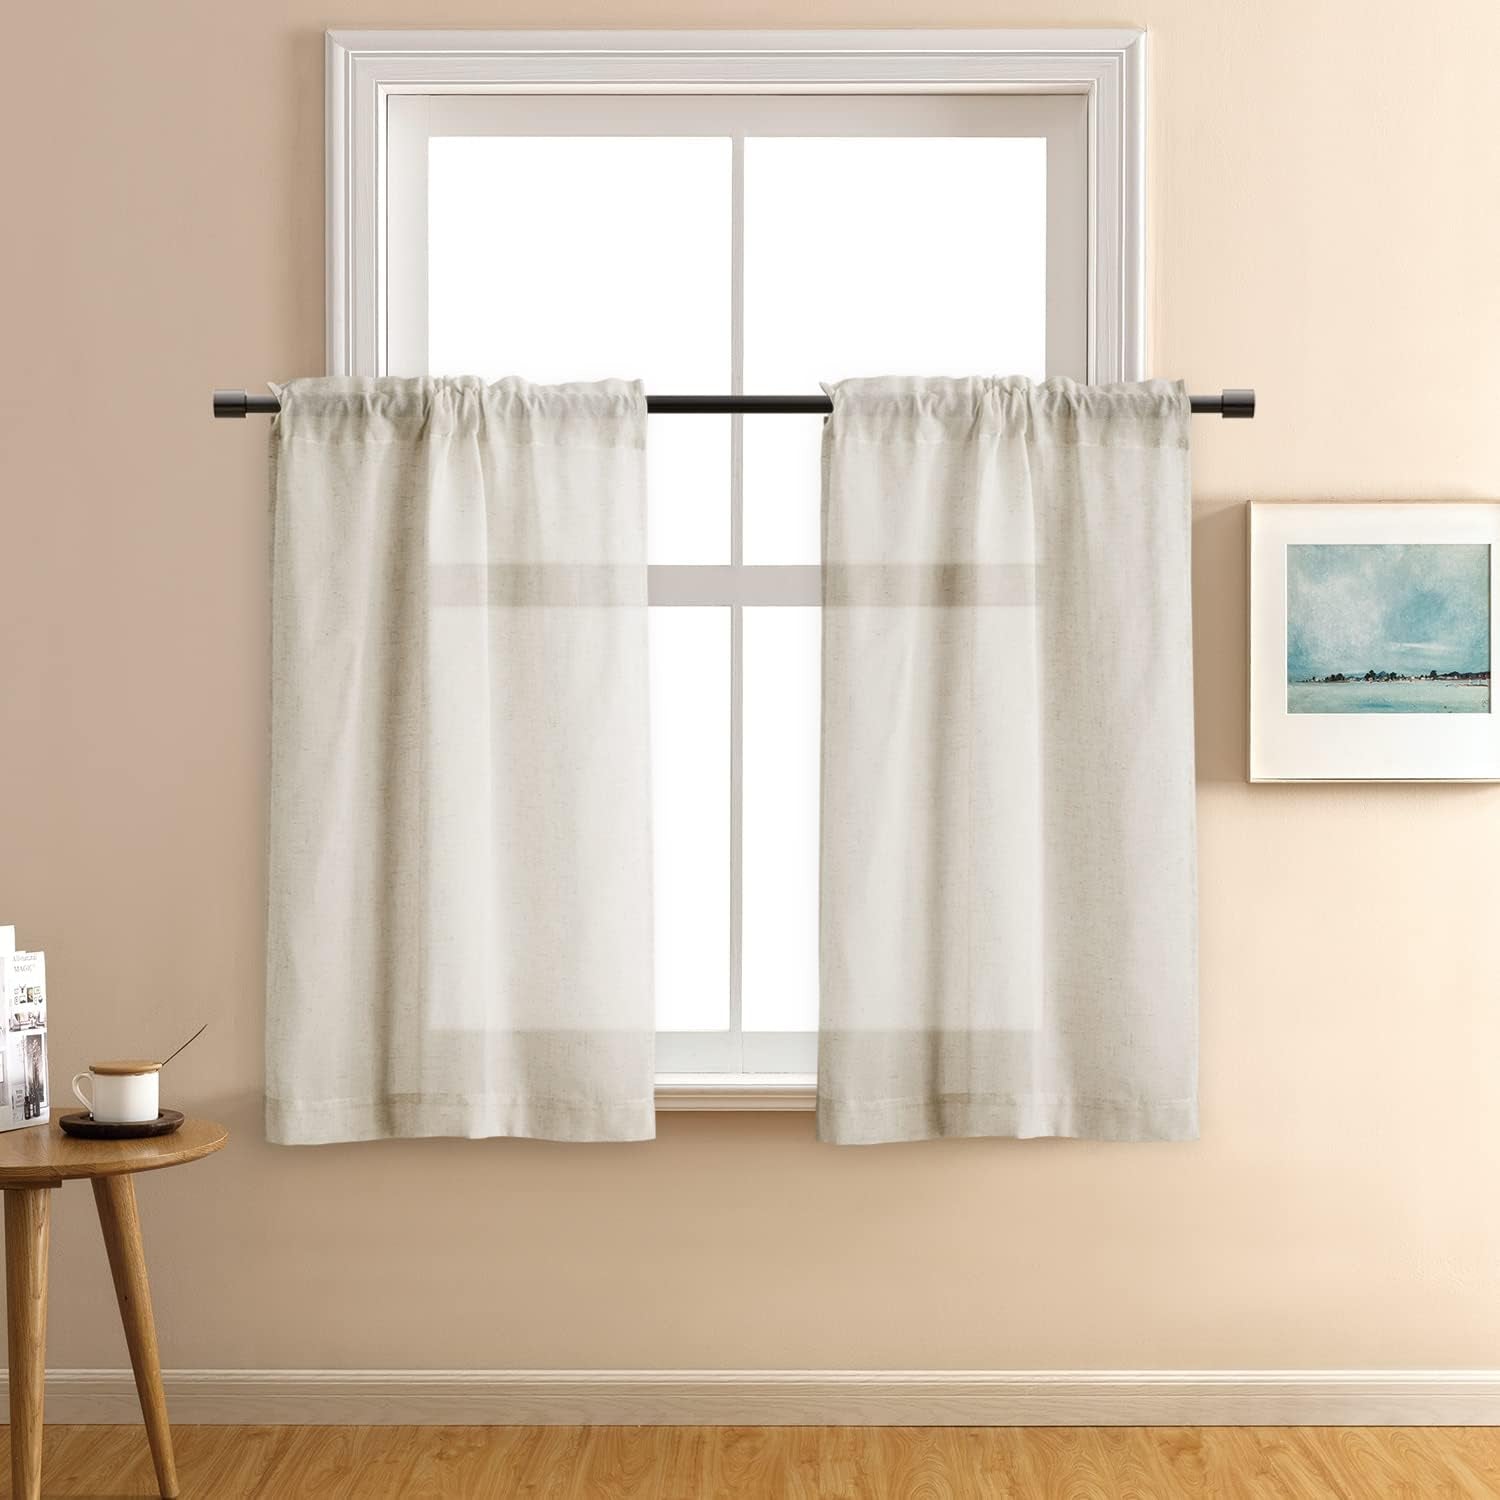 XTMYI off White Semi Sheer Short Curtains Rod Pocket Kitchen Neutral Linen Textured Casual Weave Cafe Half Cream Ivory Small Window Treatments 36 Inches Long for Travel Bathroom Laundry Room 2 Panels  XTMYI TEXTILE   